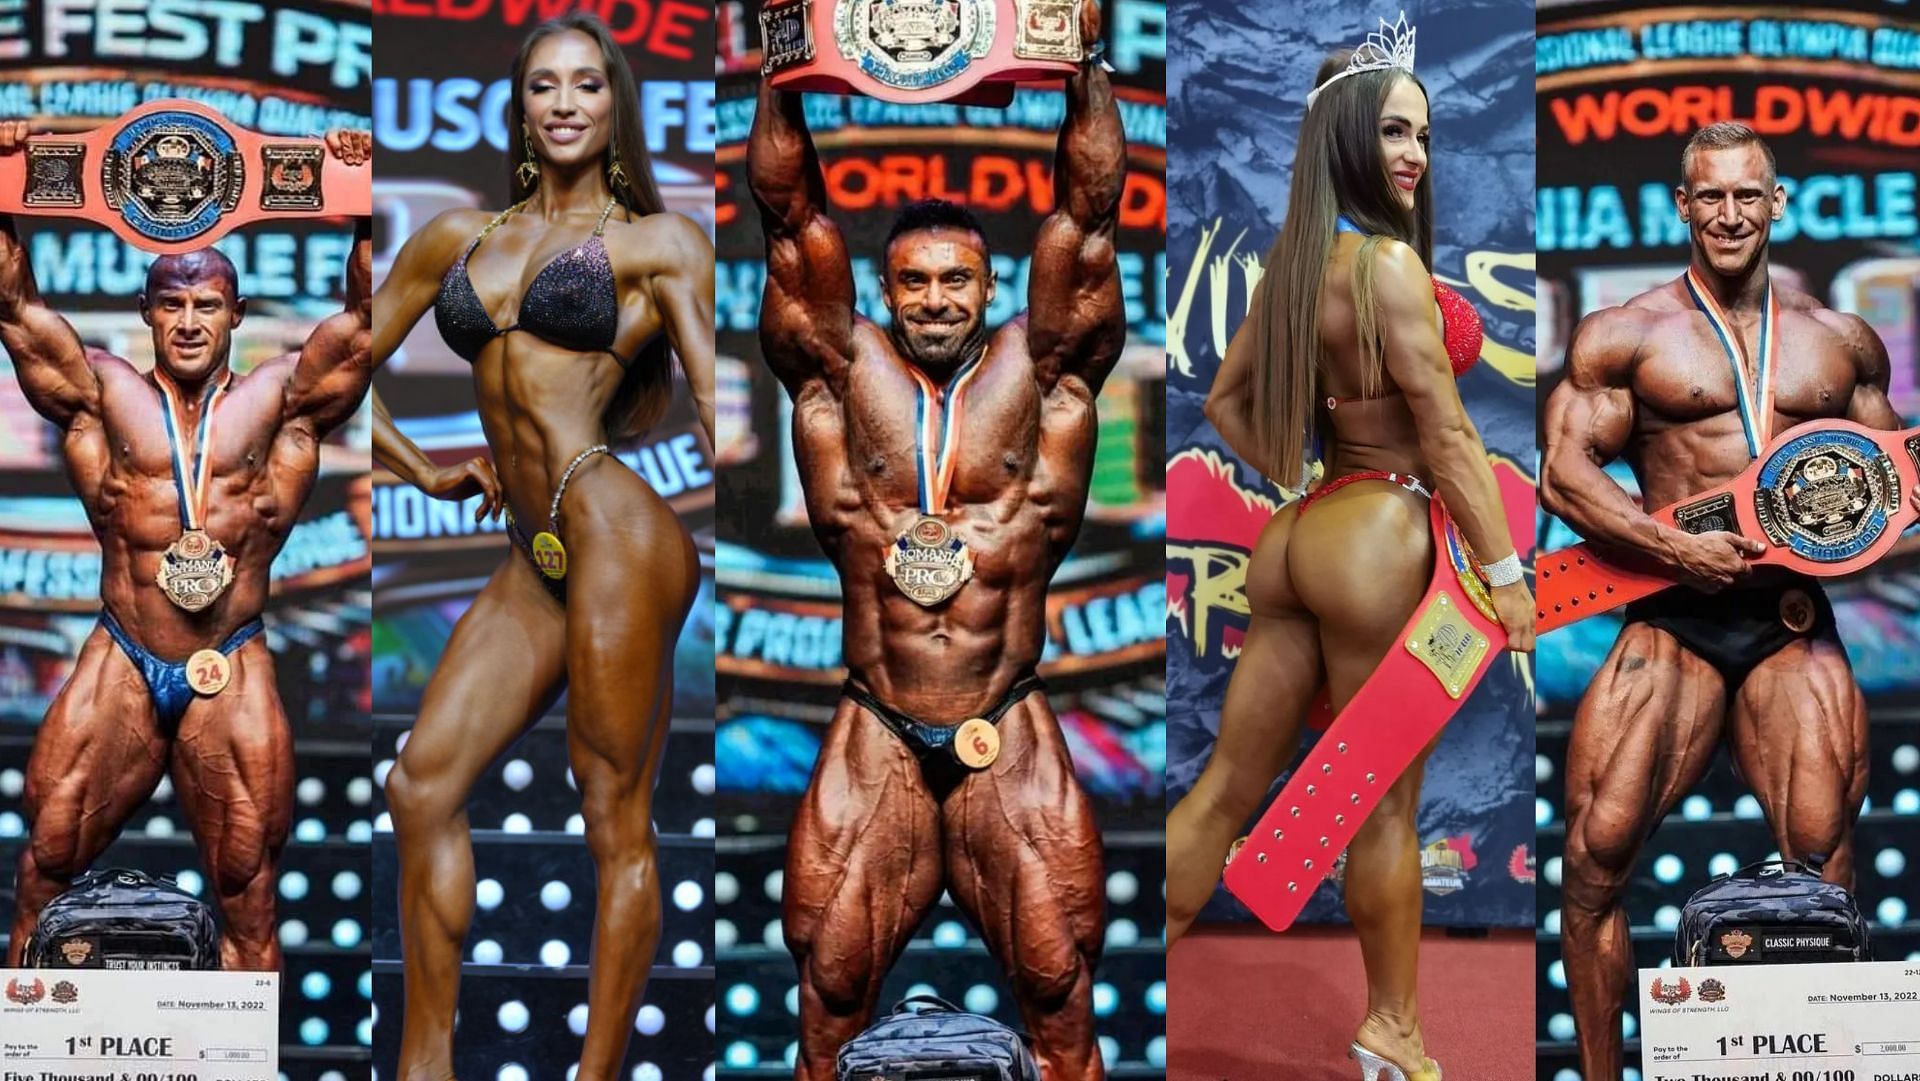 Men's Physique Competitions: How to Choose the Right Division